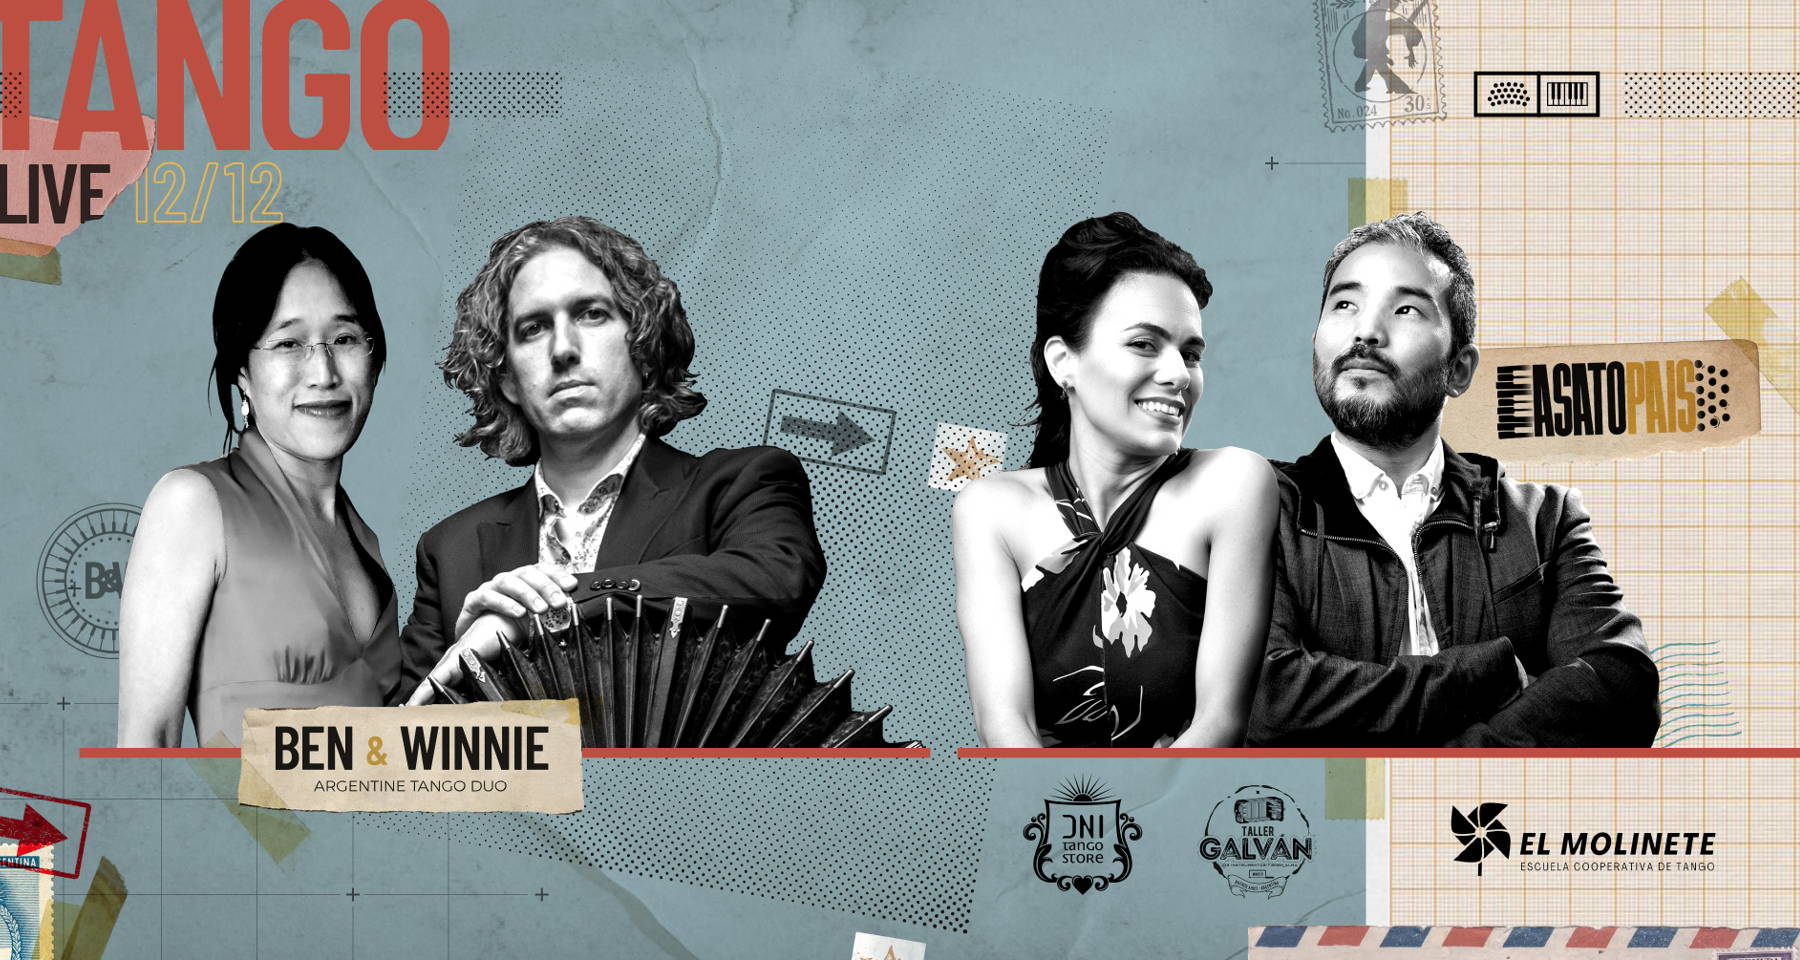 Argentine Tango Across Continents: Double-Band Live Show with Ben & Winnie (USA) and Asato-Pais (Argentina)